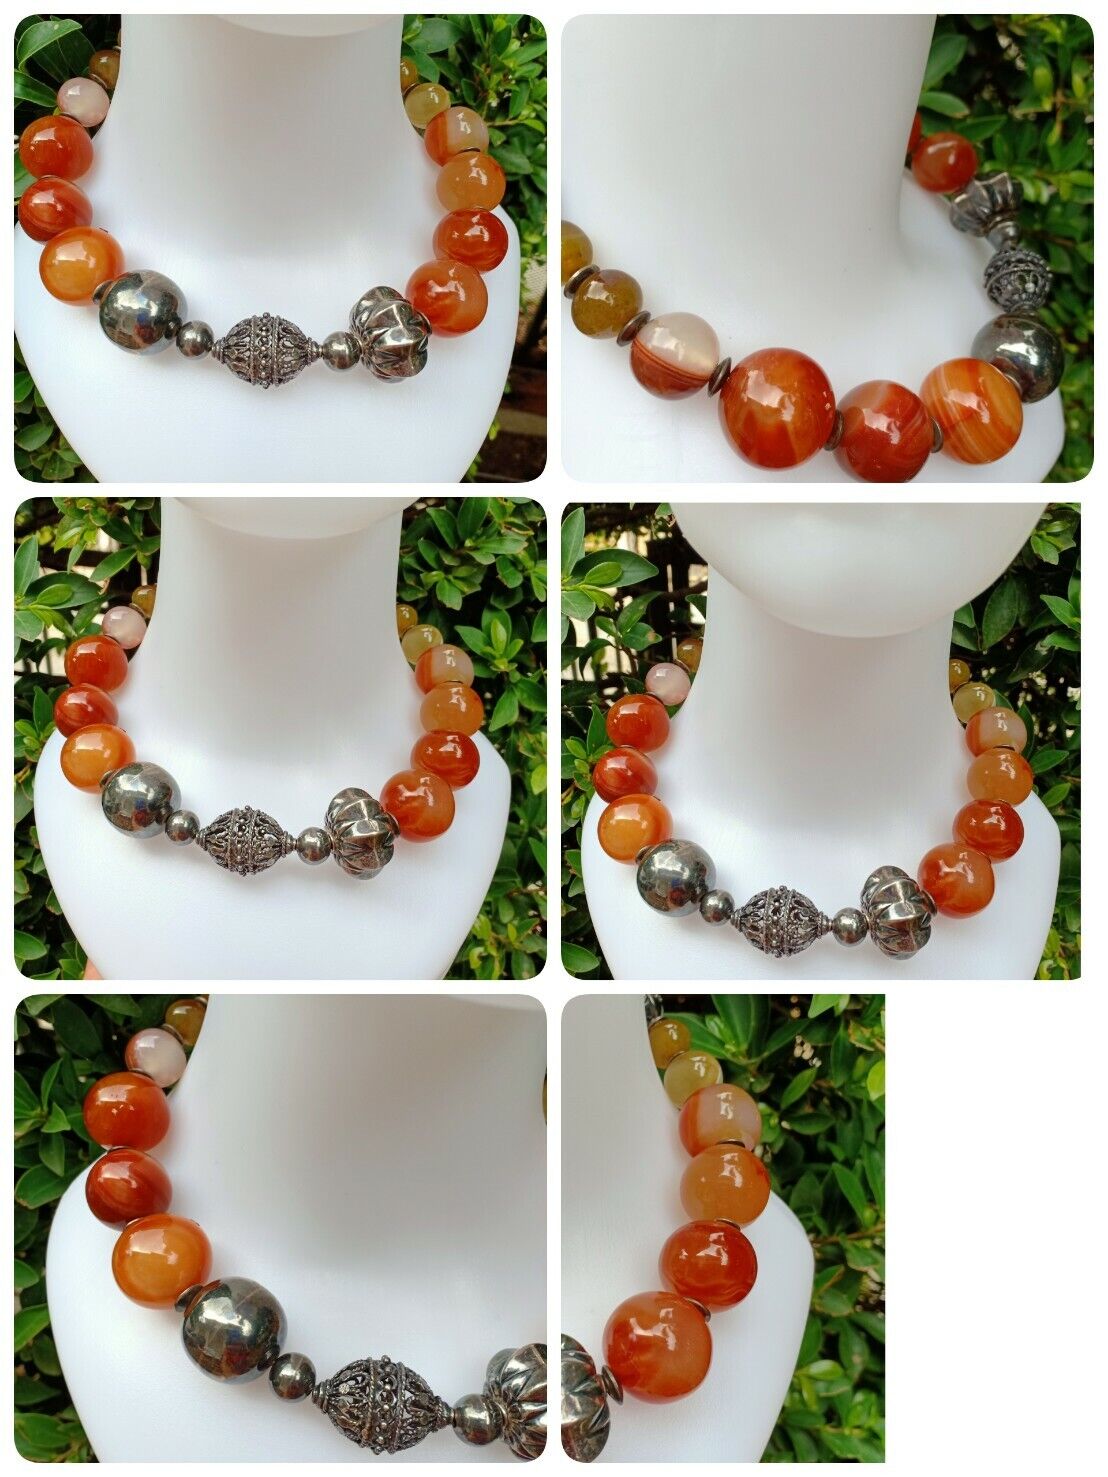 Jewelry Agate Natural Earth Stones Beads Brown Color Vintage Old Short Necklace 